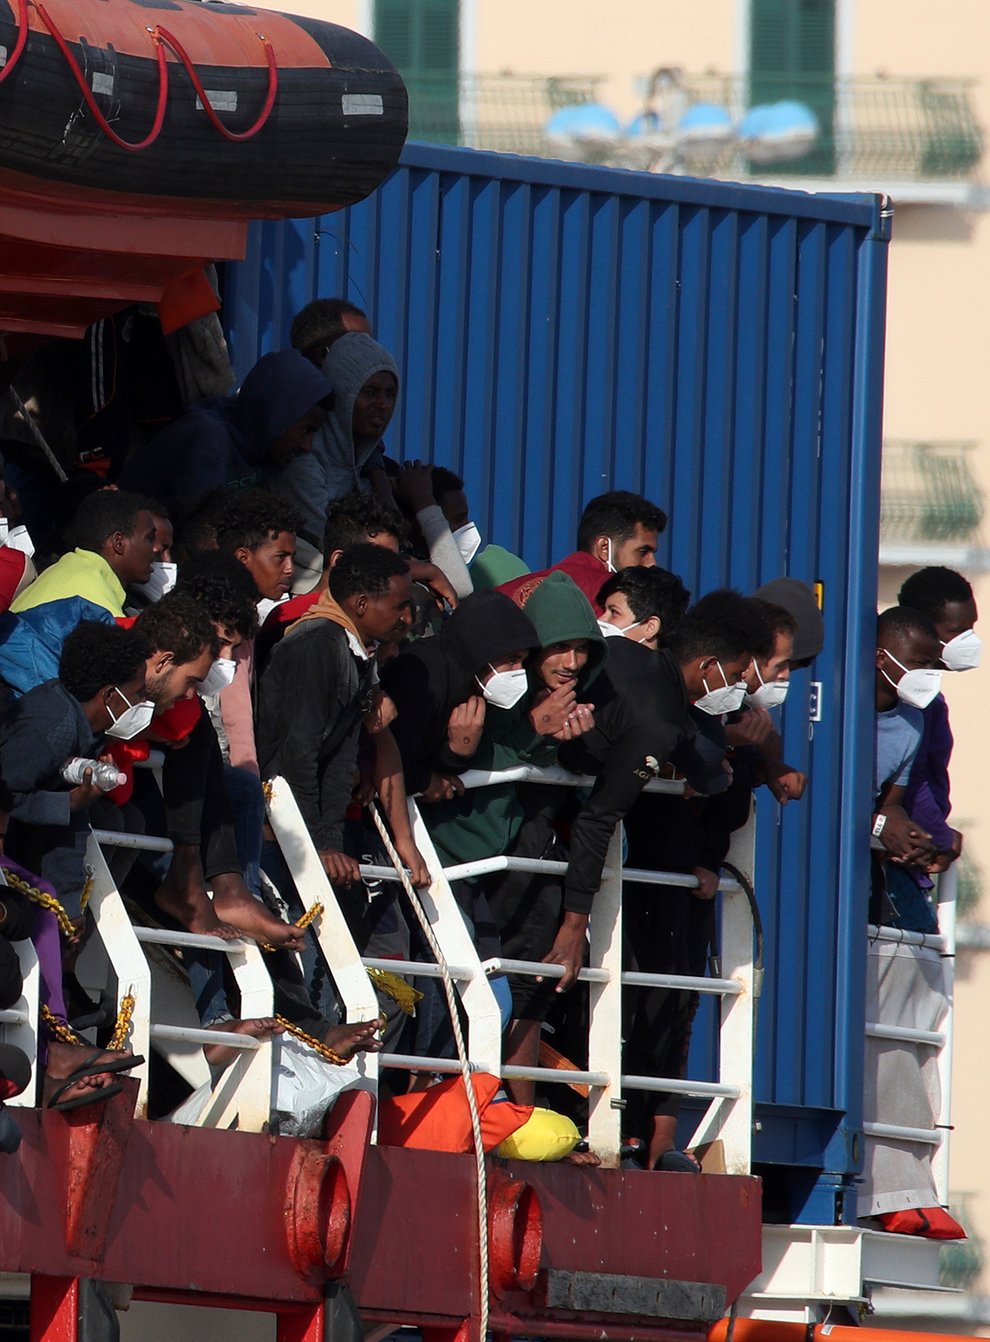 The Sea-Eye 4 ship with more than 800 people on board arrives in Trapani (Alberto Lo Bianco/LaPresse via AP)